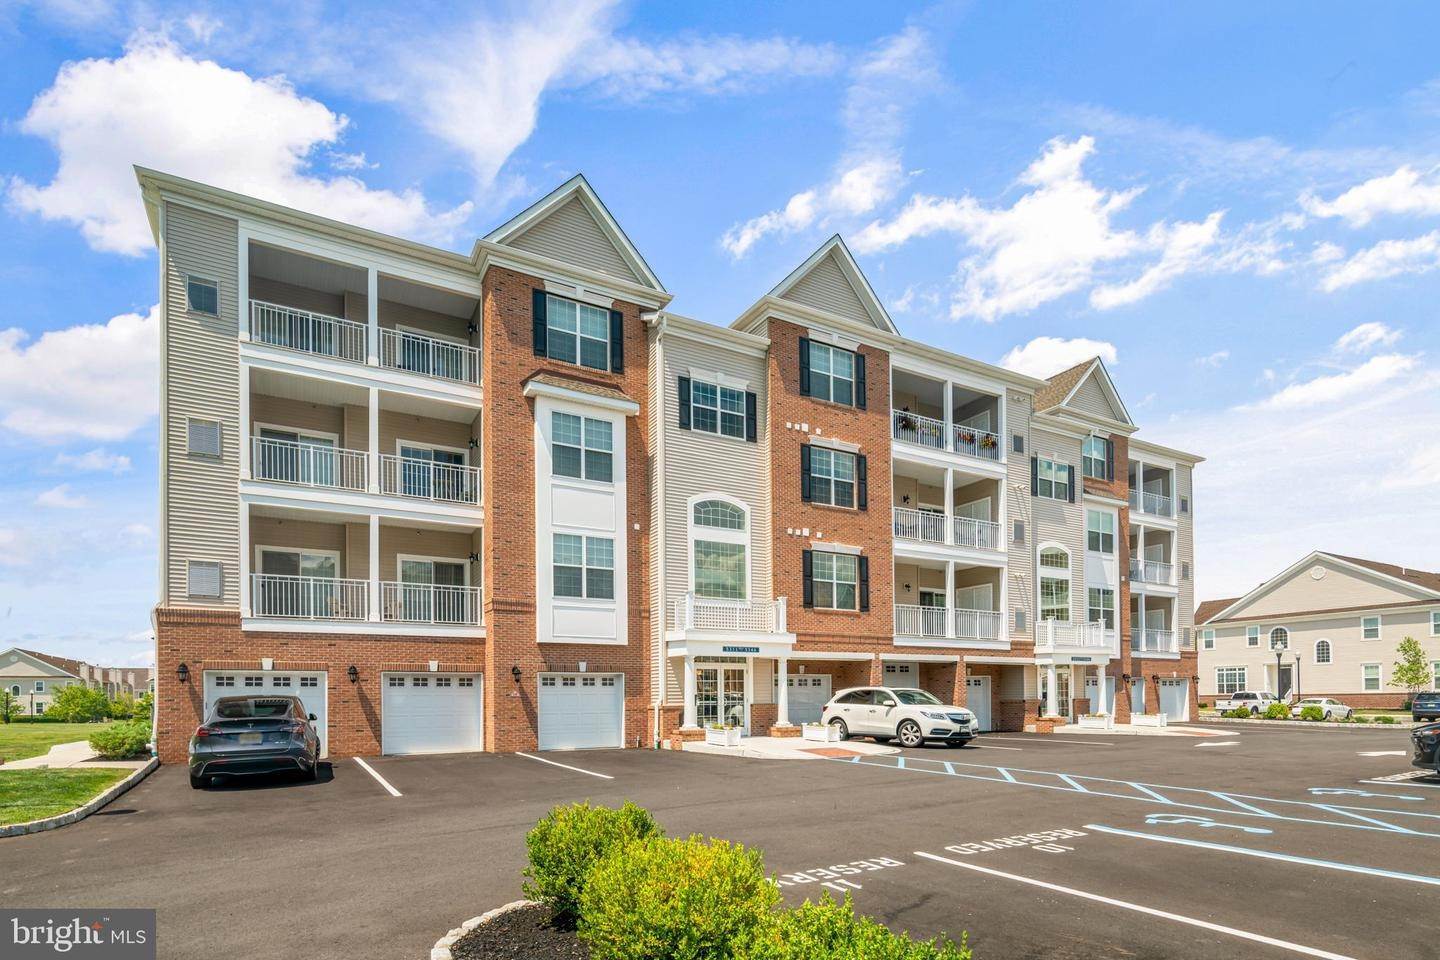 Apartments at 5331 PALOMINO COURT Cherry Hill, New Jersey 08002 United States